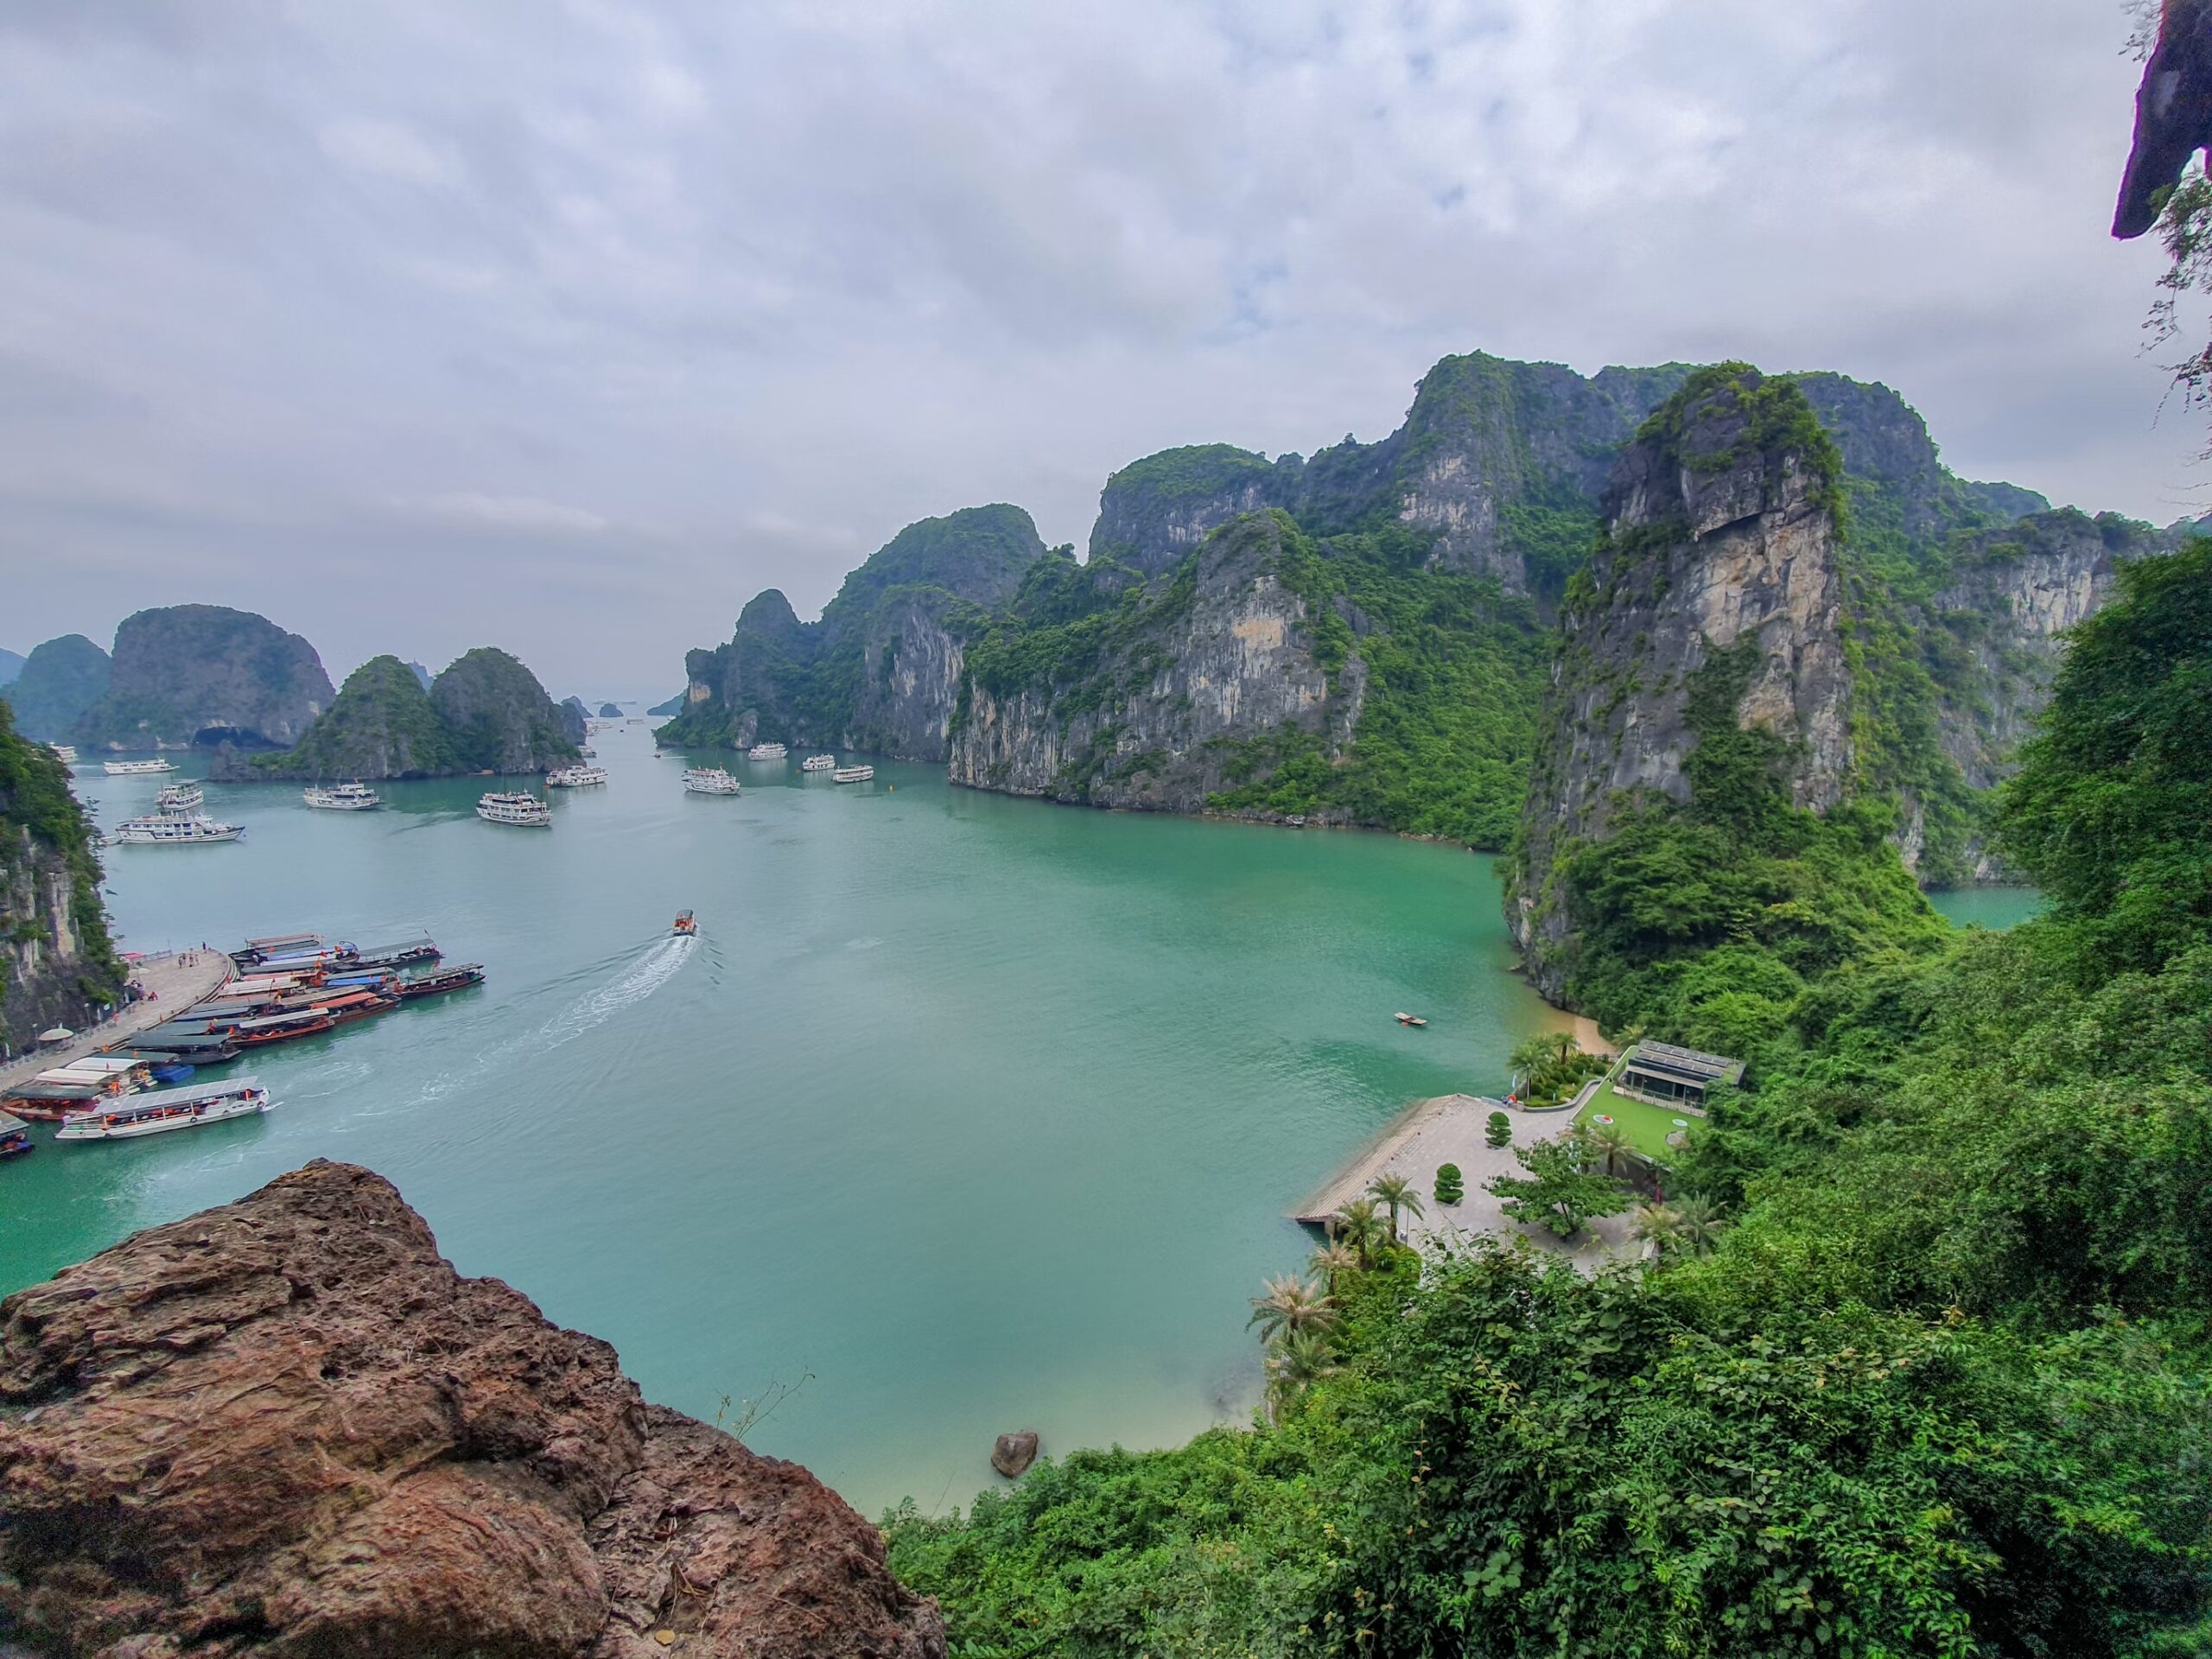 Climate tech startups, VCs give shape to Vietnam's sustainable economy